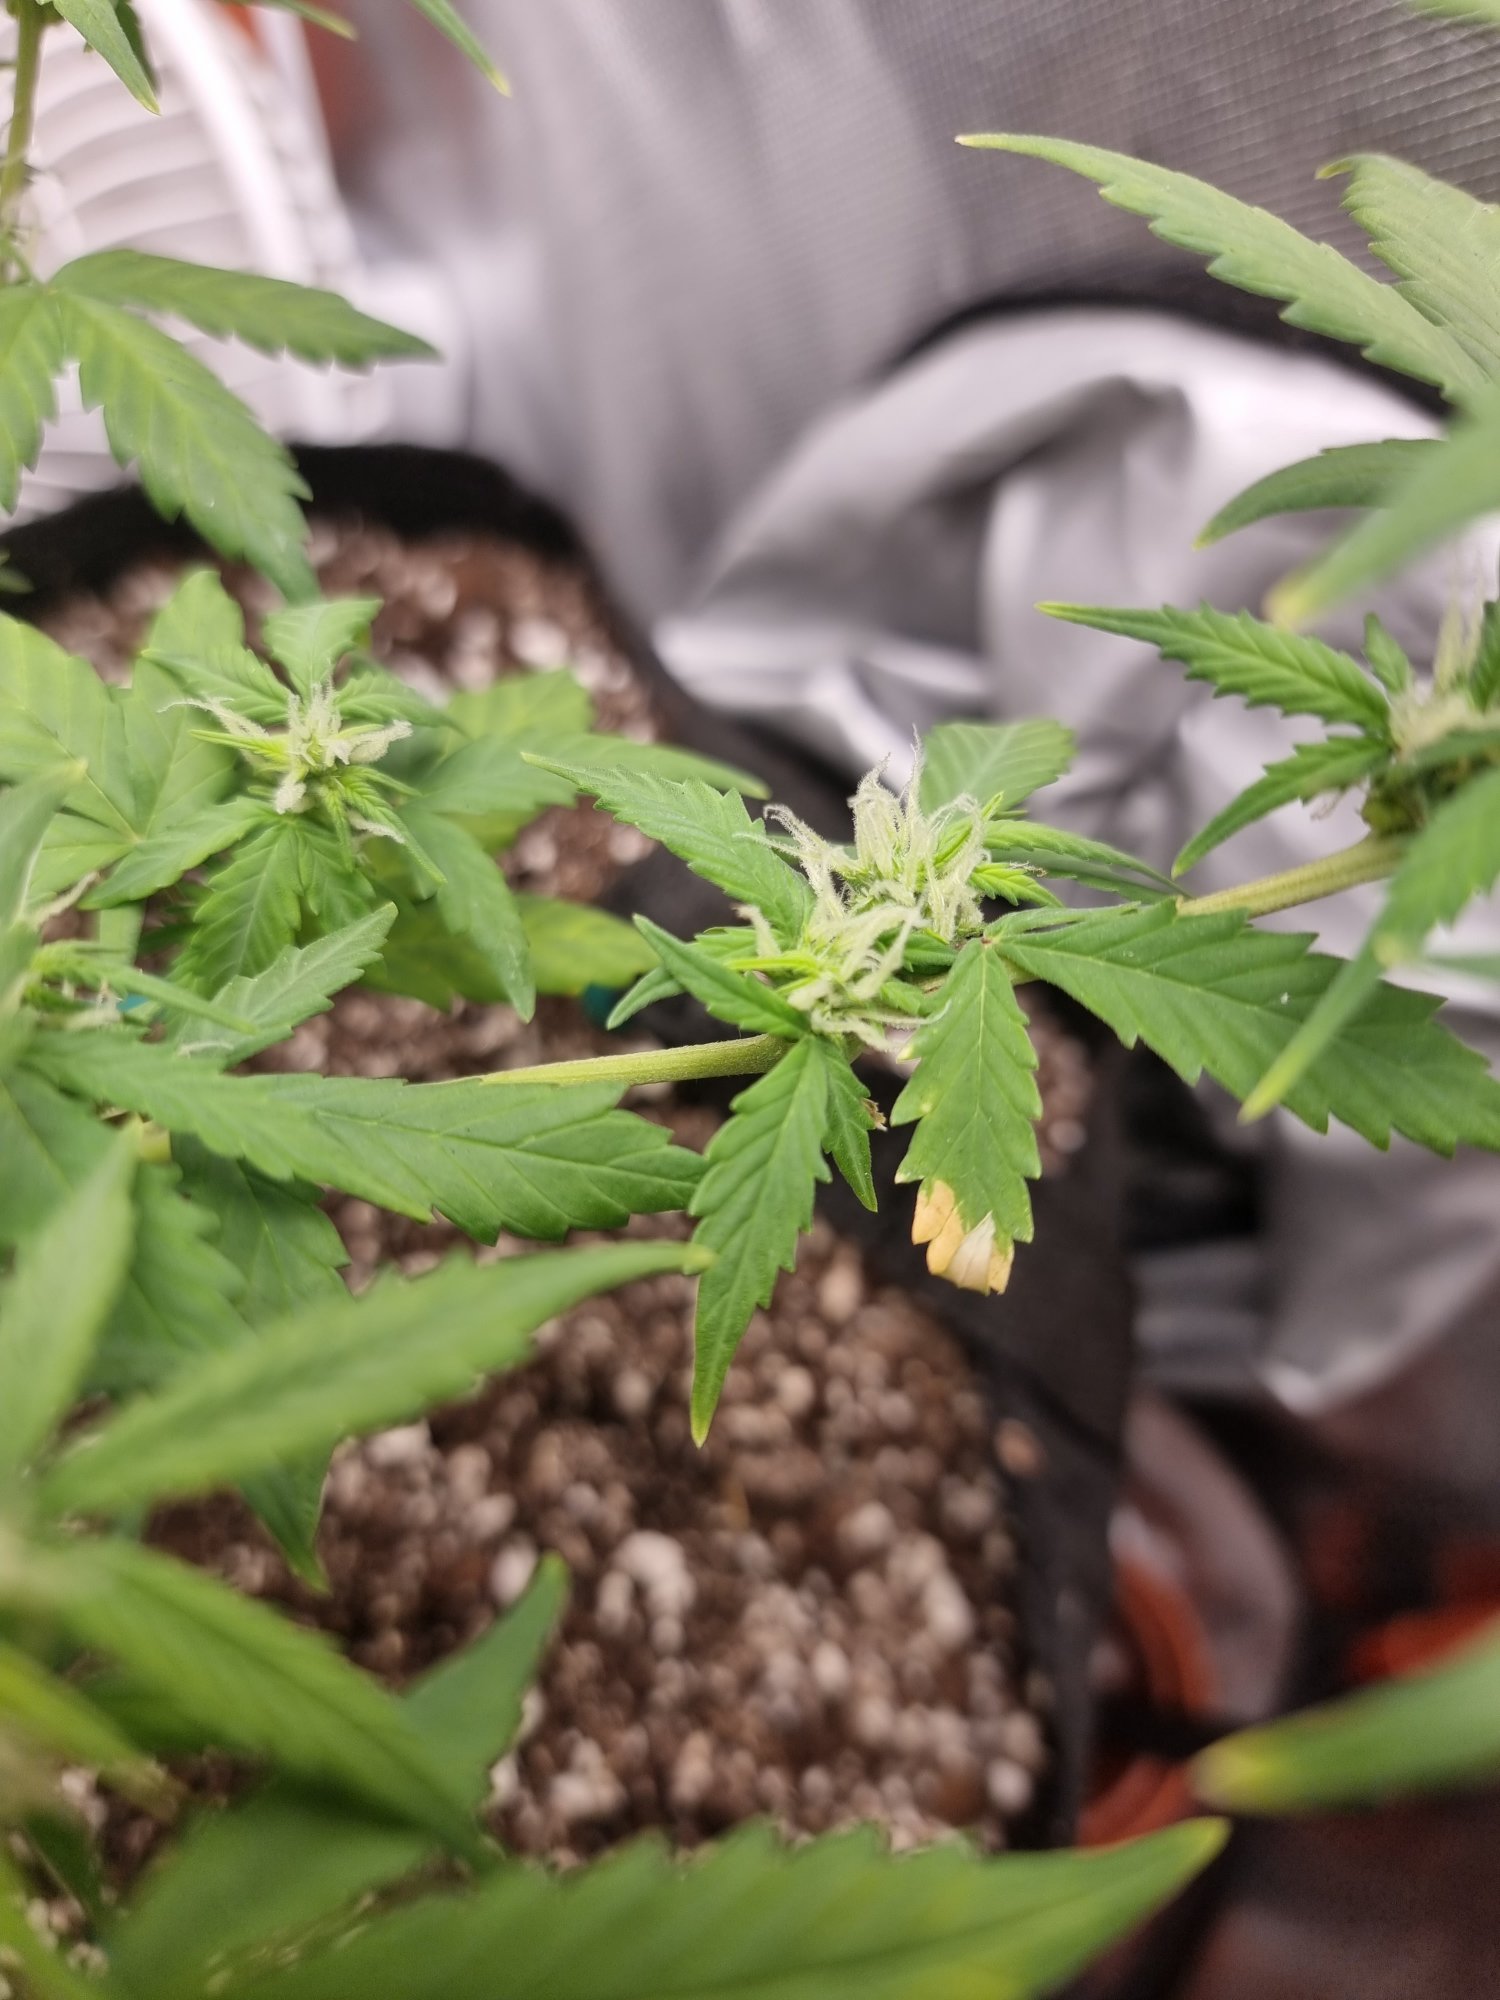 Day 38 northern lights autoflower yellowing leaves and brown spots 4